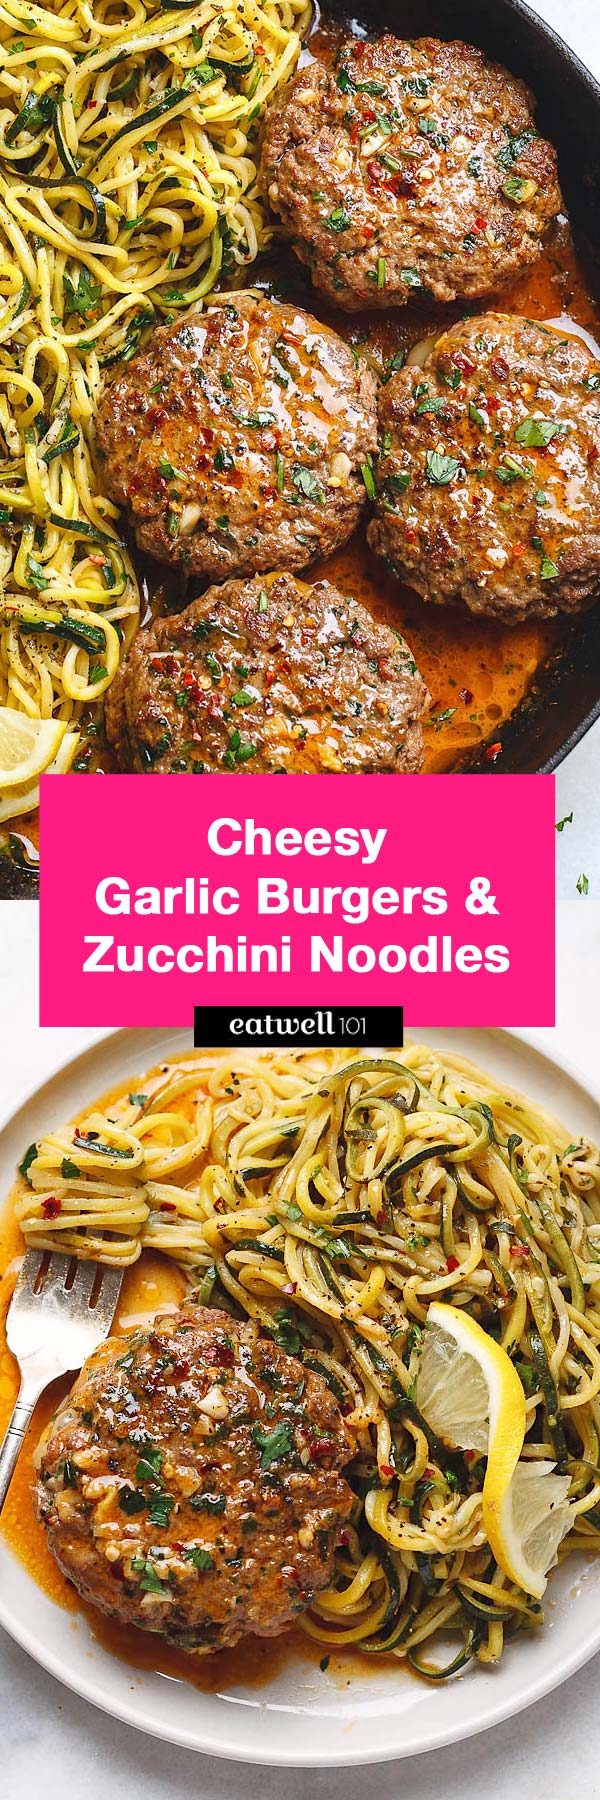 Cheesy Garlic Burgers with Lemon Butter Zucchini Noodles - #beef #burger #zucchini #eatwell101 #recipe -  Rich and juicy, you'll instantly fall in love with these hamburger patties served with plenty of lemony zucchini noodles.